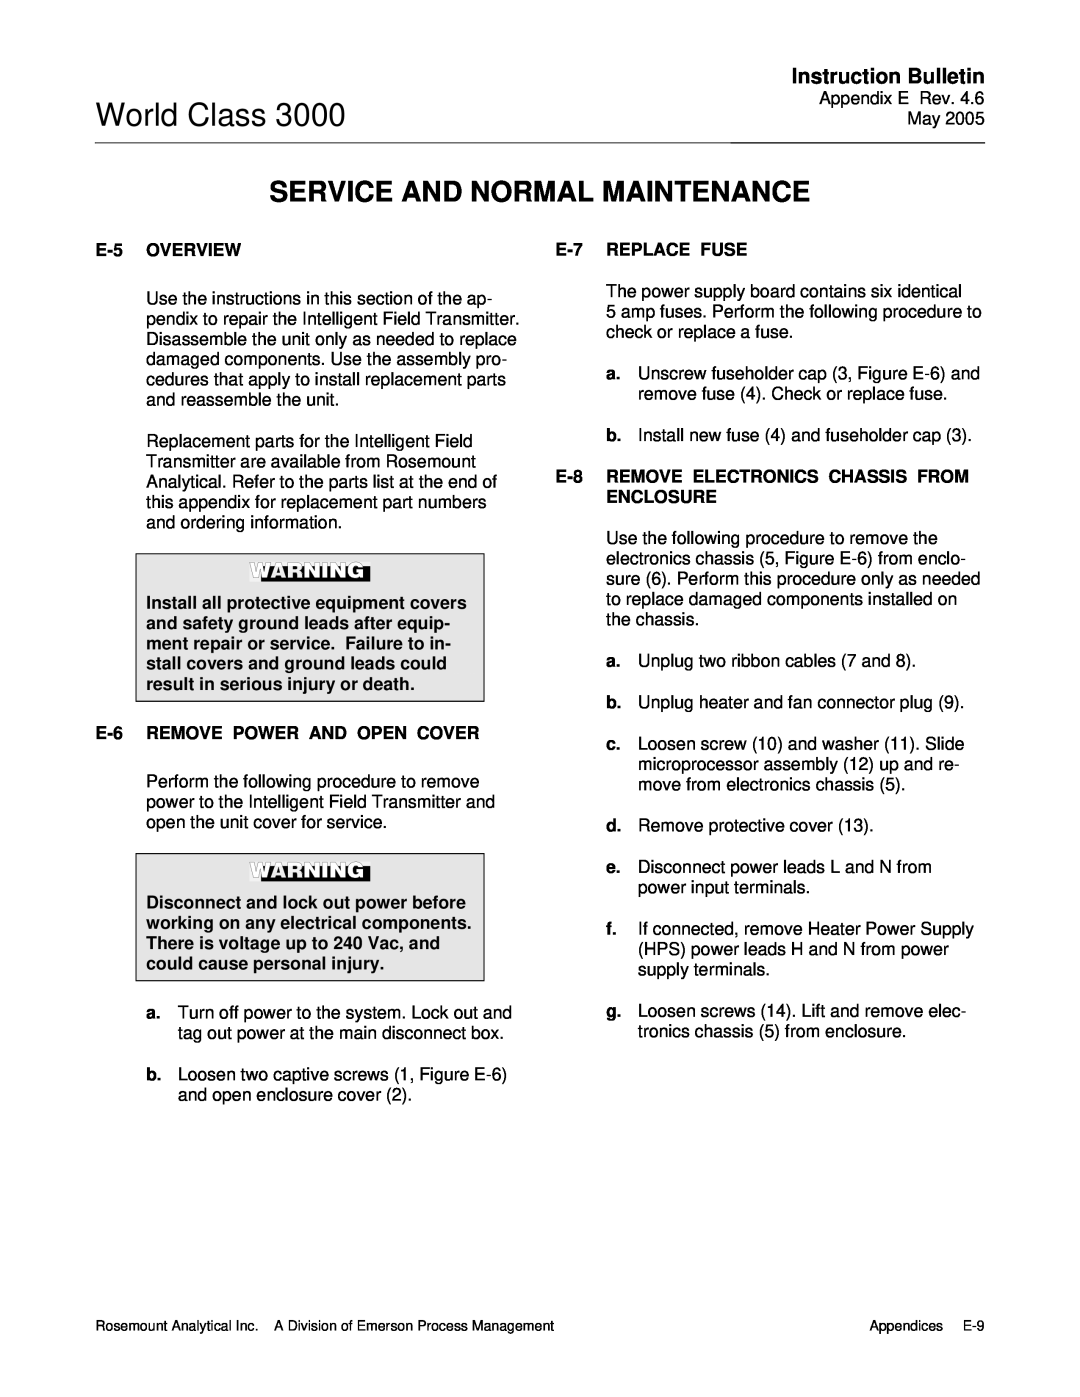 Emerson 3000 World Class, Service And Normal Maintenance, Instruction Bulletin, E-5OVERVIEW, E-7REPLACE FUSE 